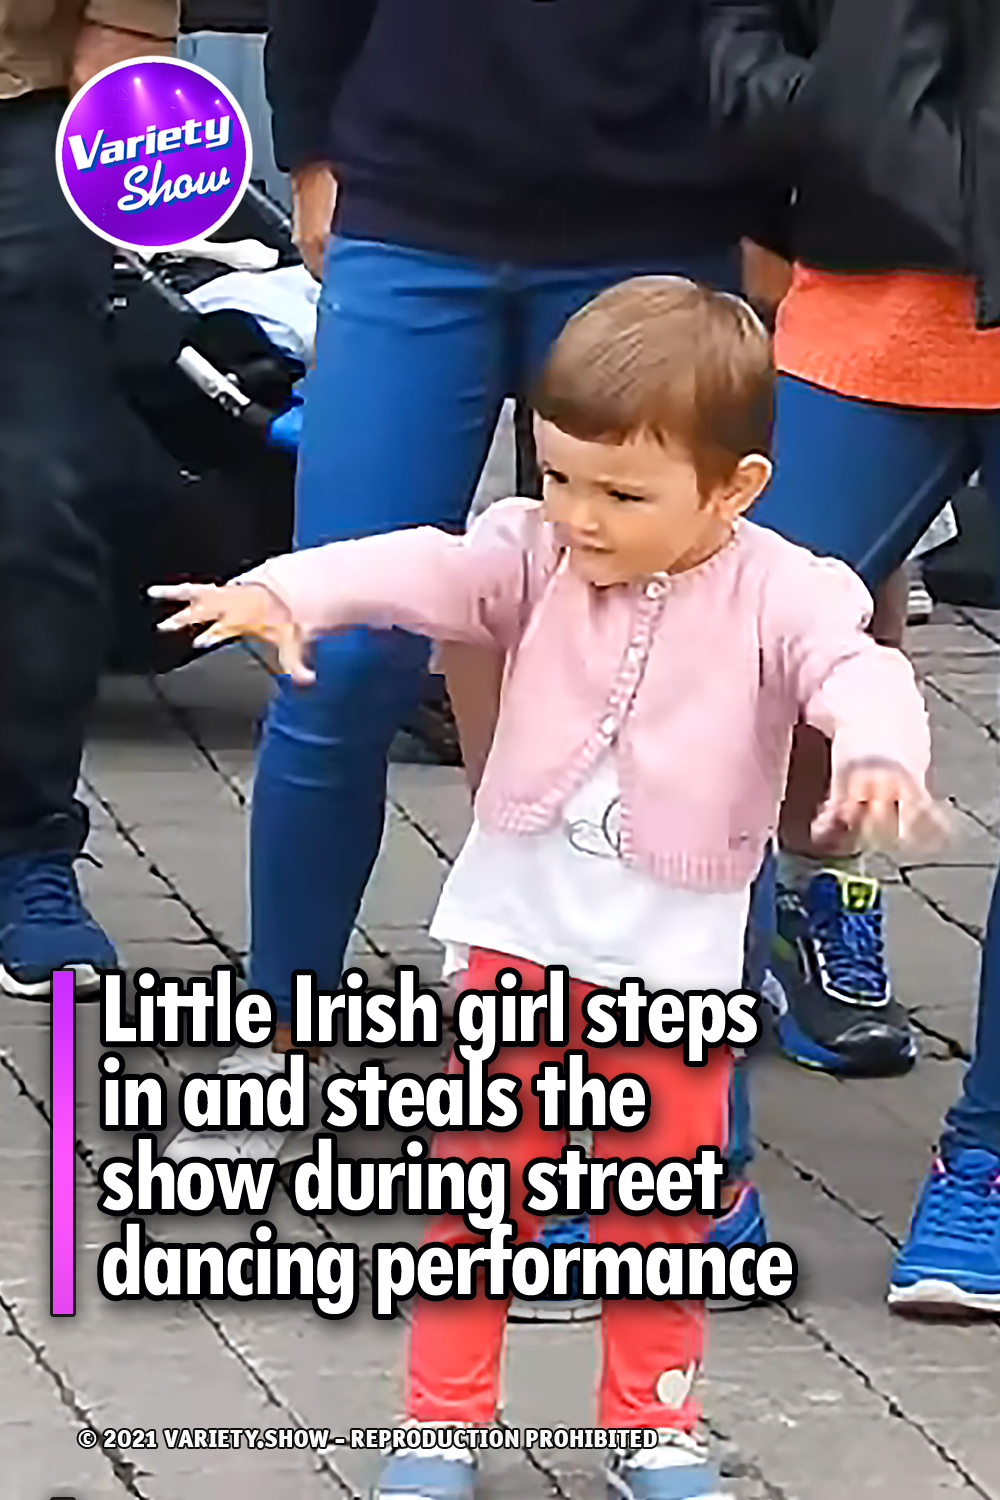 Little Irish girl steps in and steals the show during street dancing performance